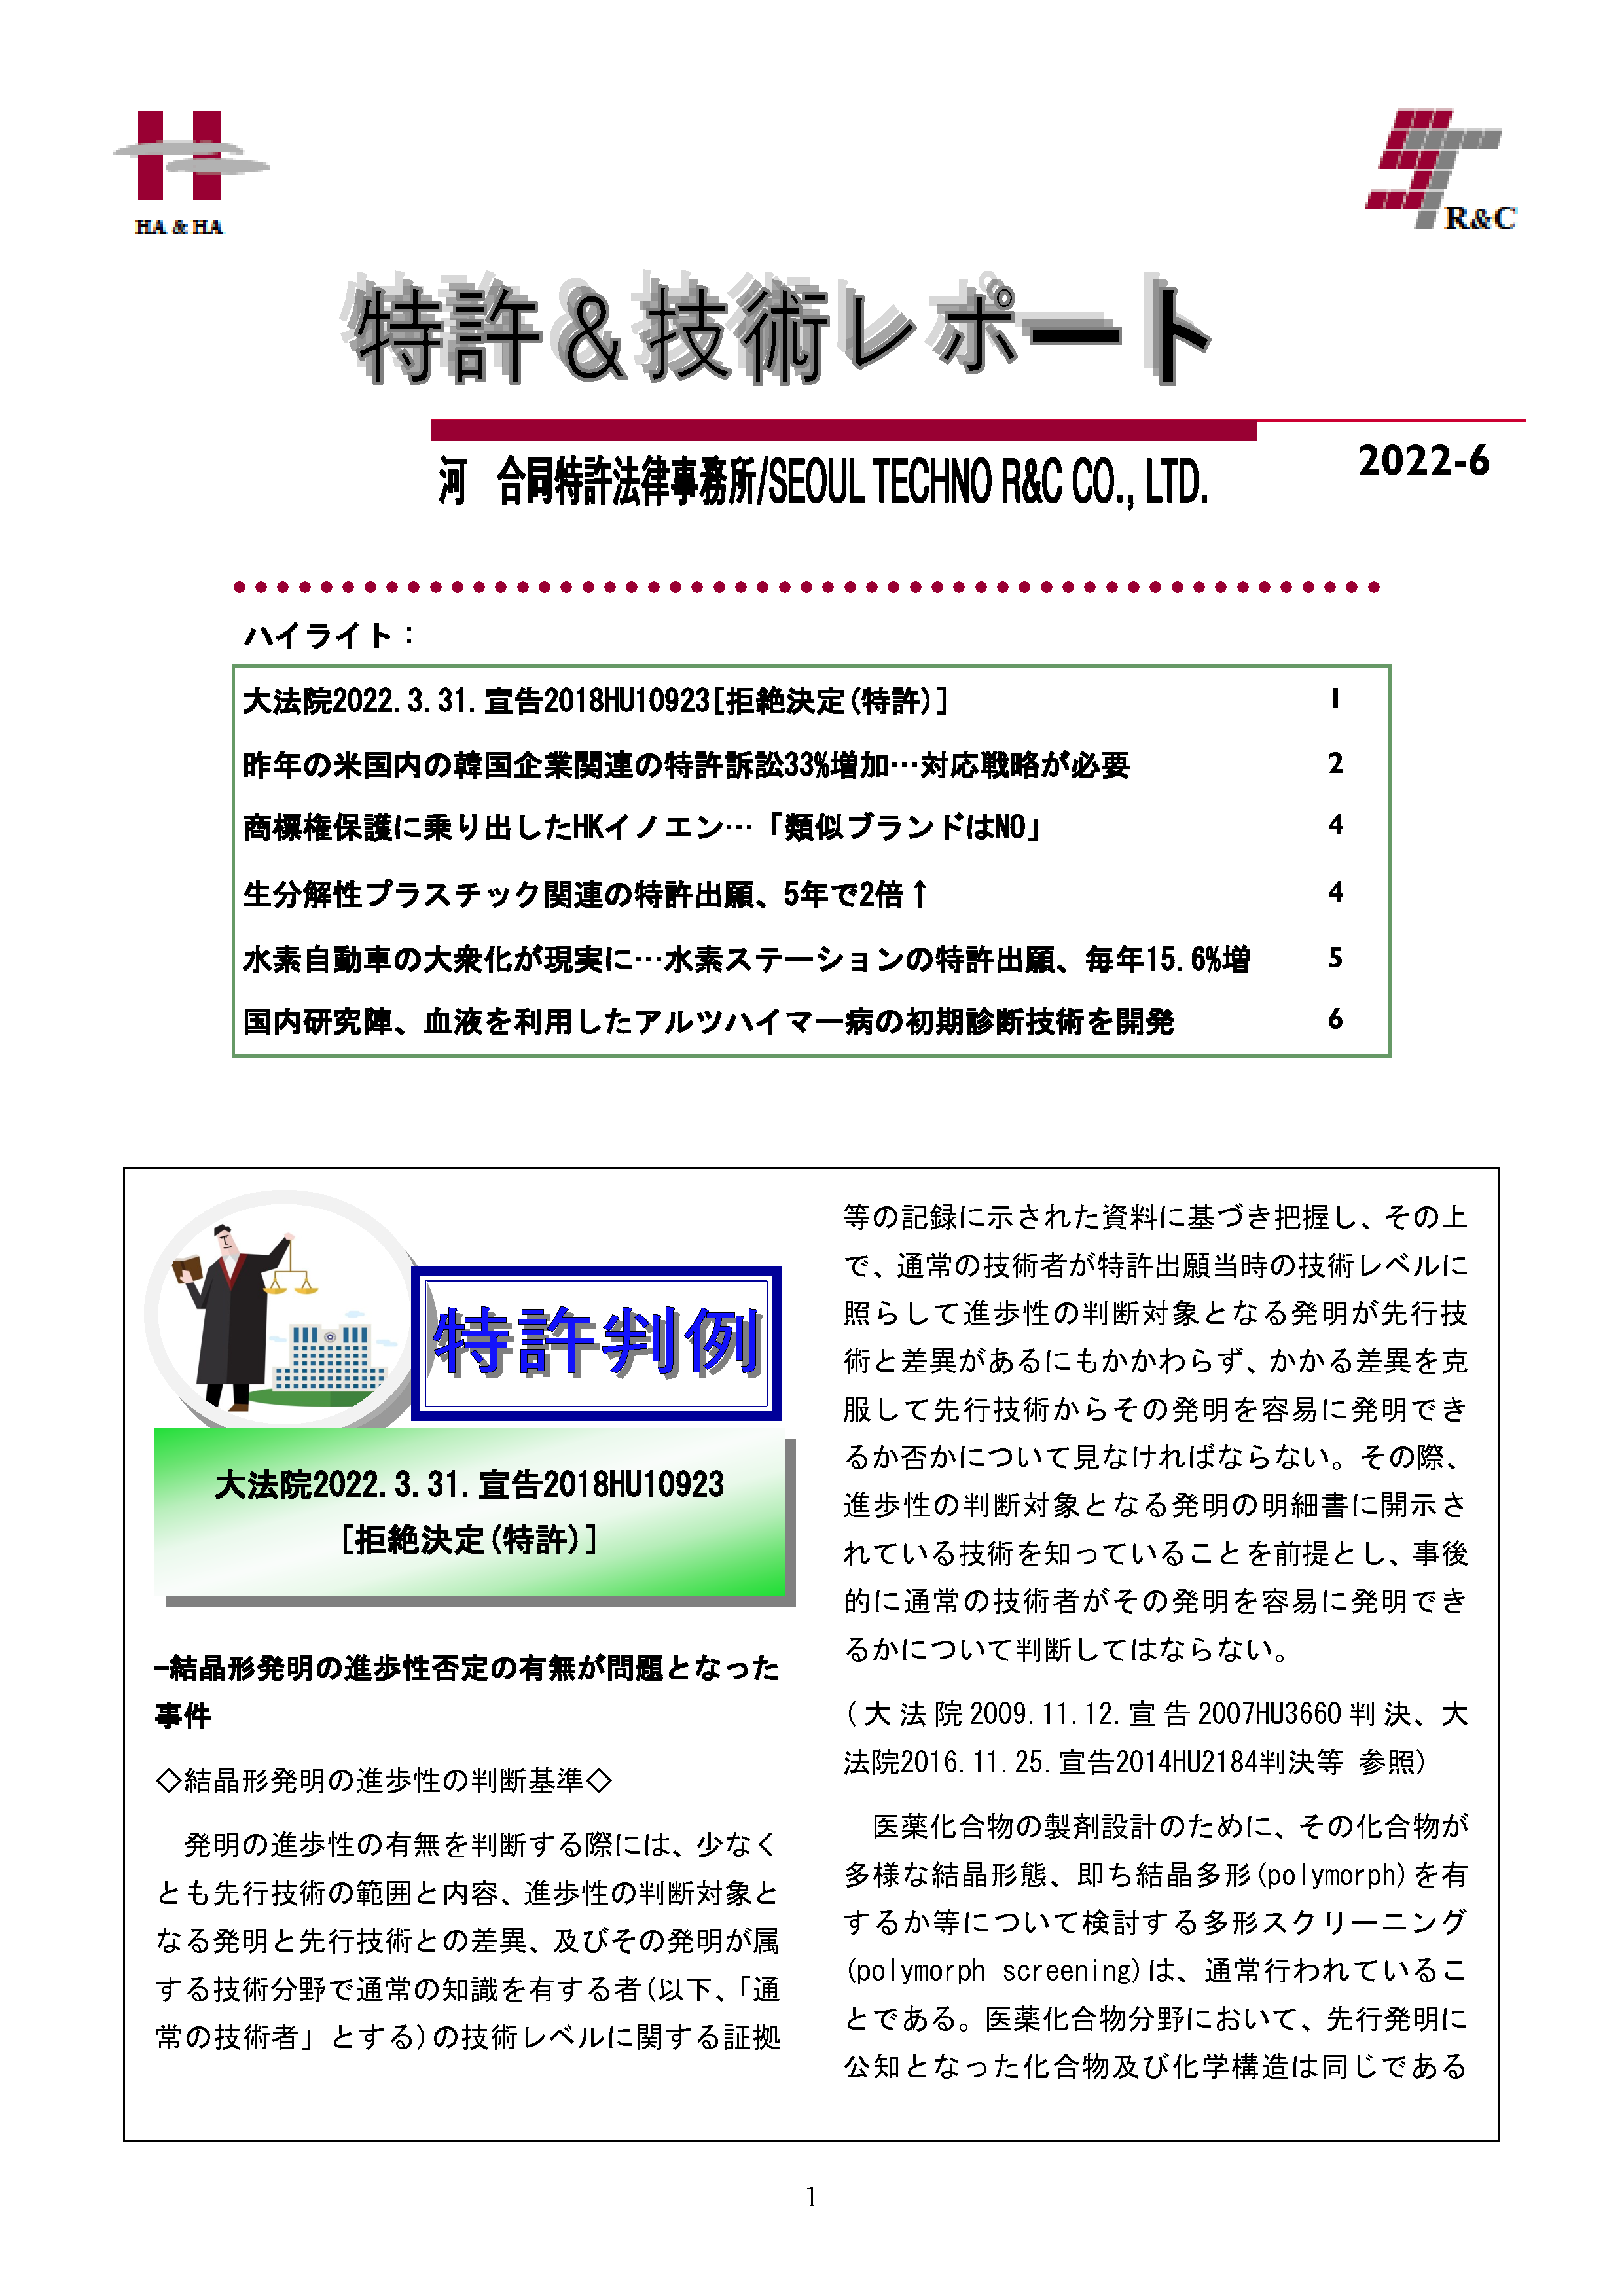 Newsletter_202206_1.png